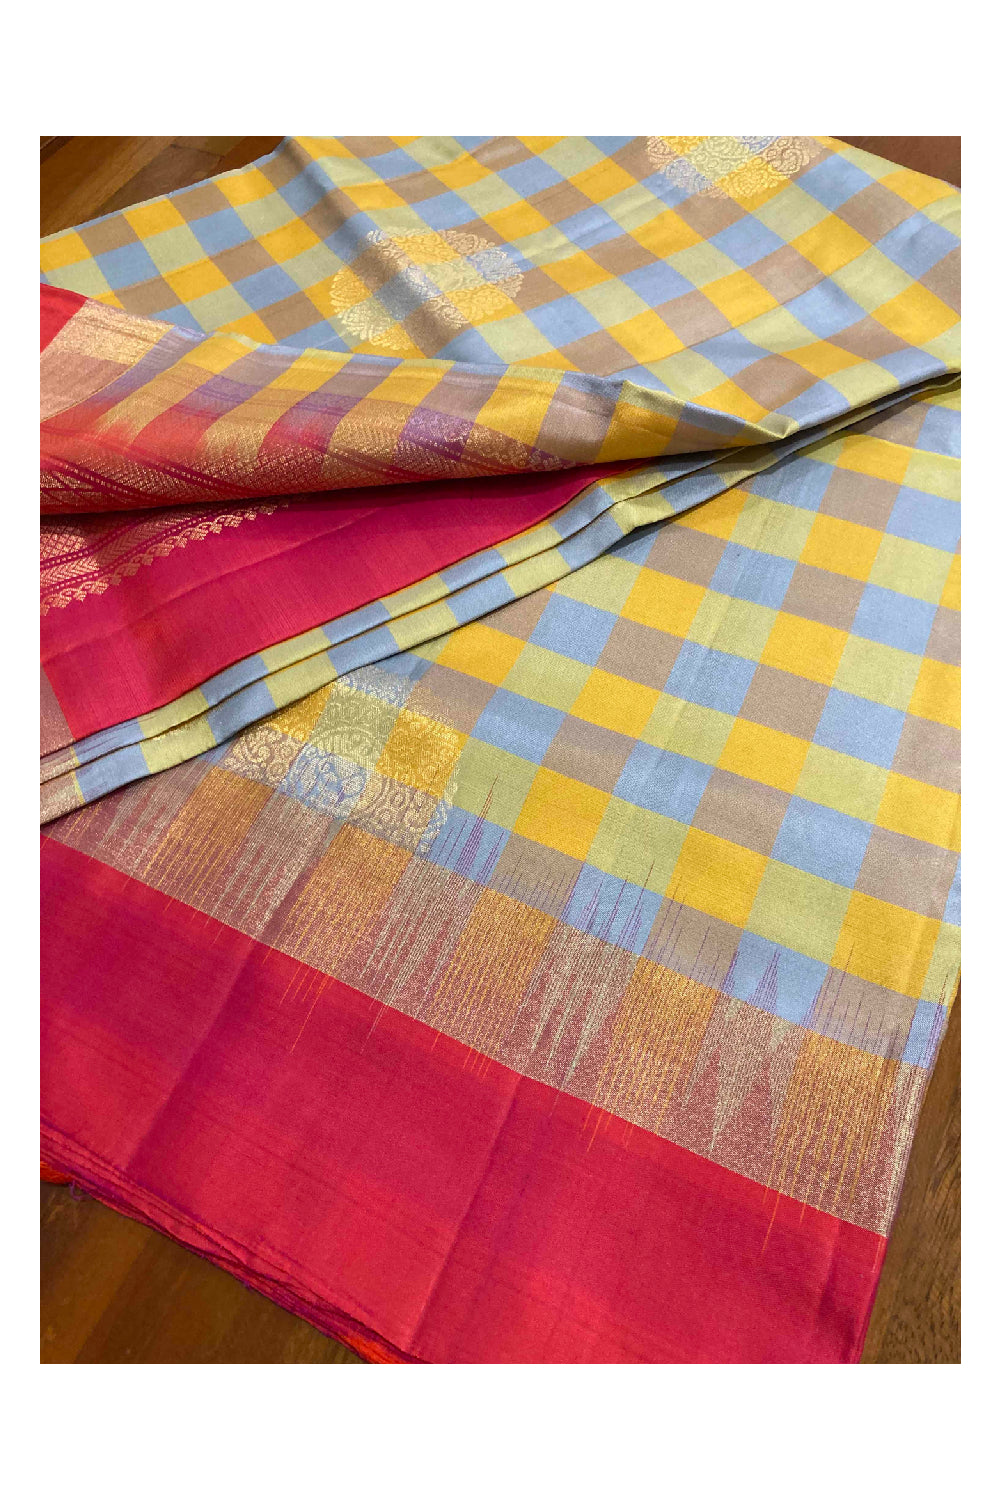 Southloom Handloom Pure Silk Kanchipuram Saree in Yellow Blue Checkered and Floral Motifs